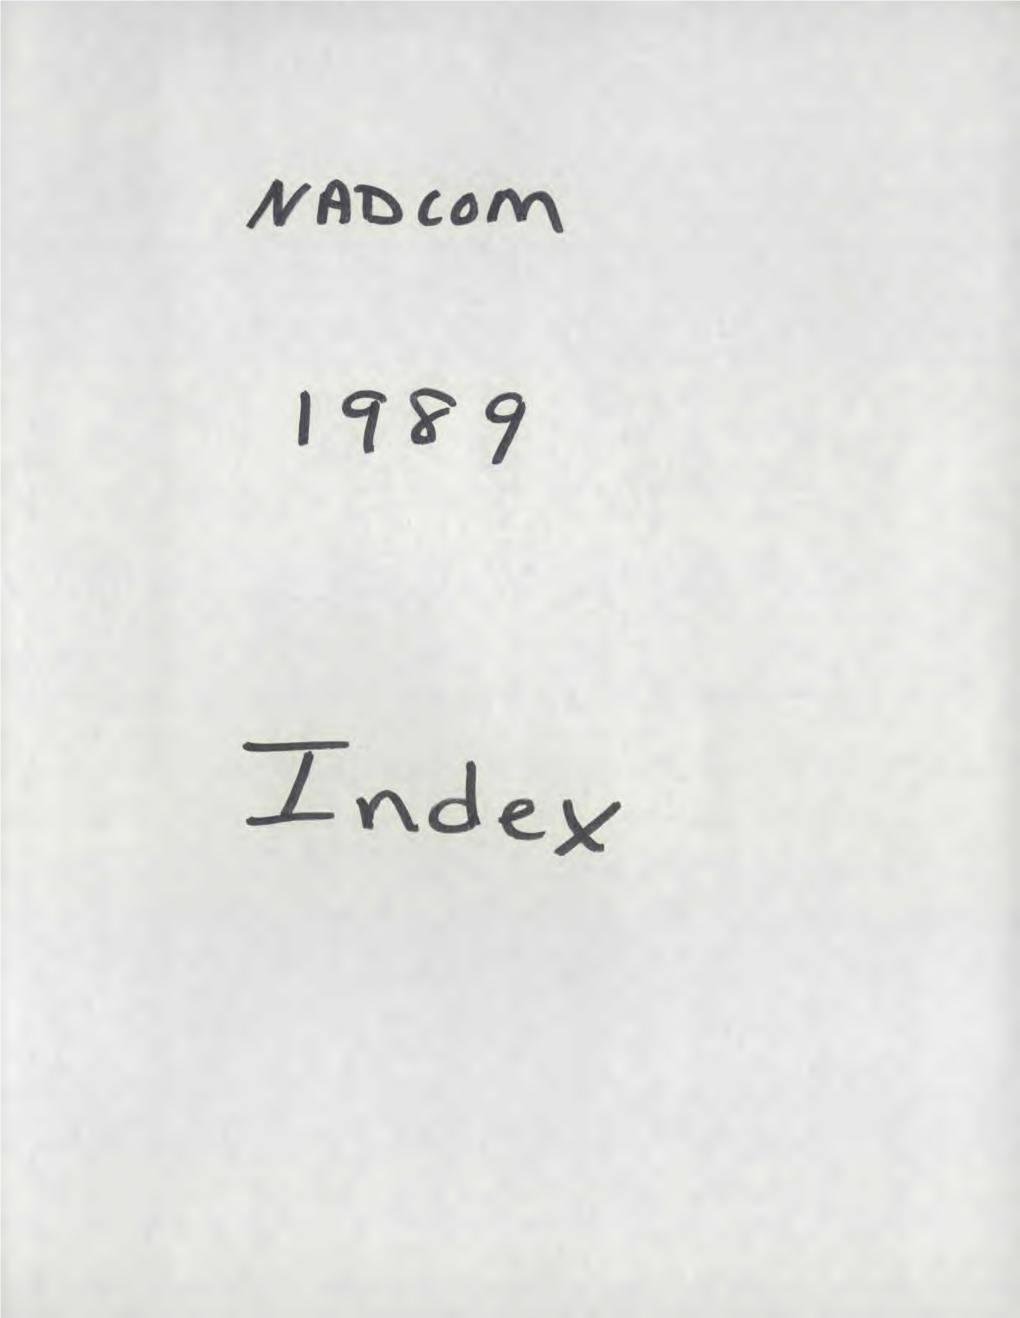 NAD Committee Minutes for December 31, 1989